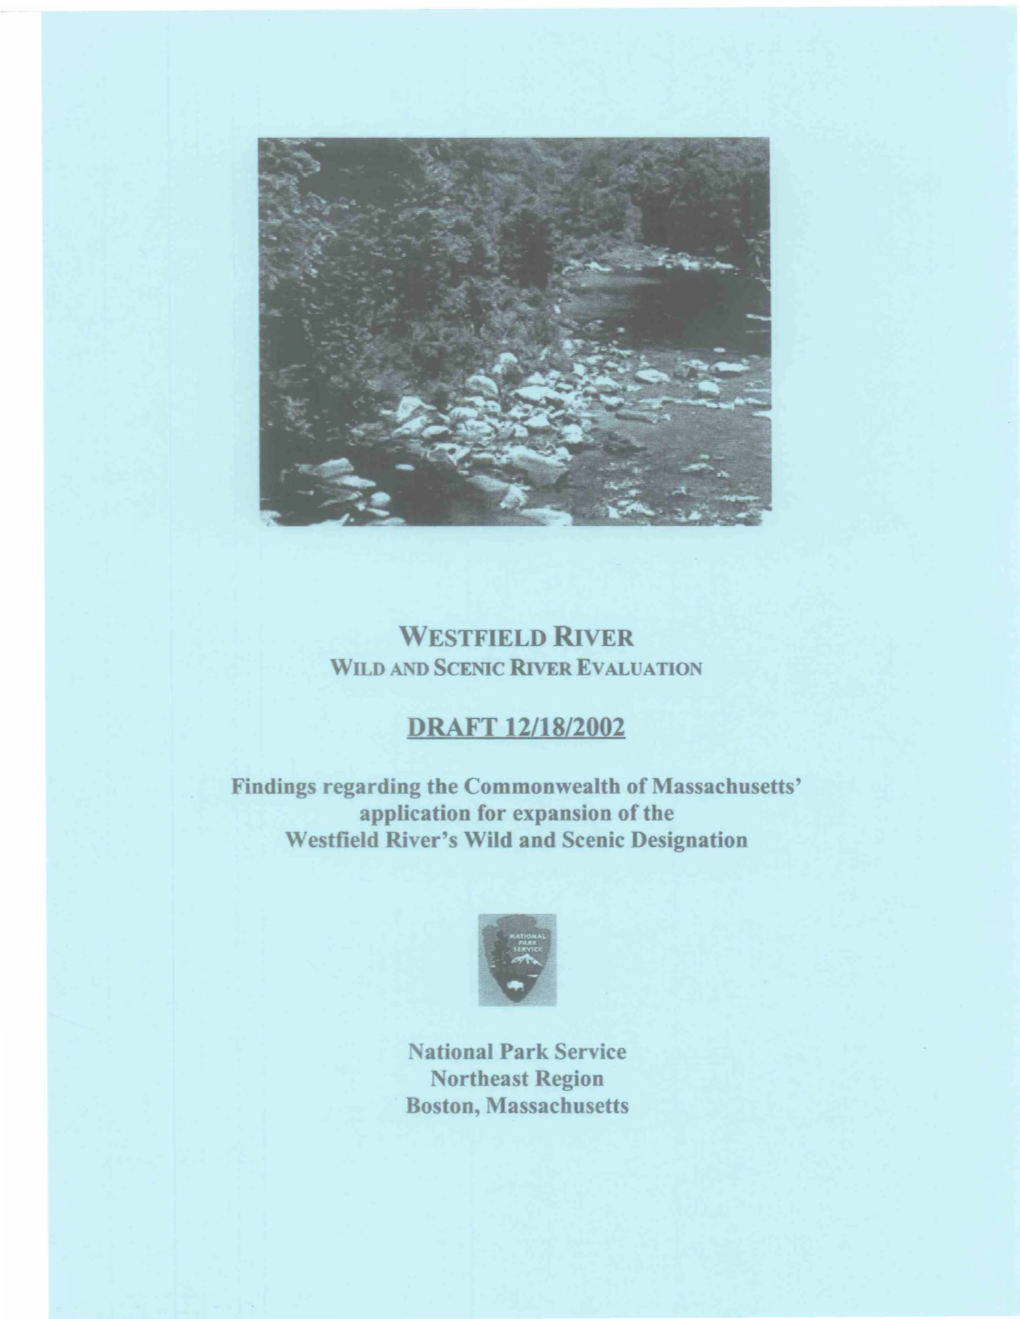 Massachusetts' Application for Expansion of the Westfield River's Wild and Scenic Designation